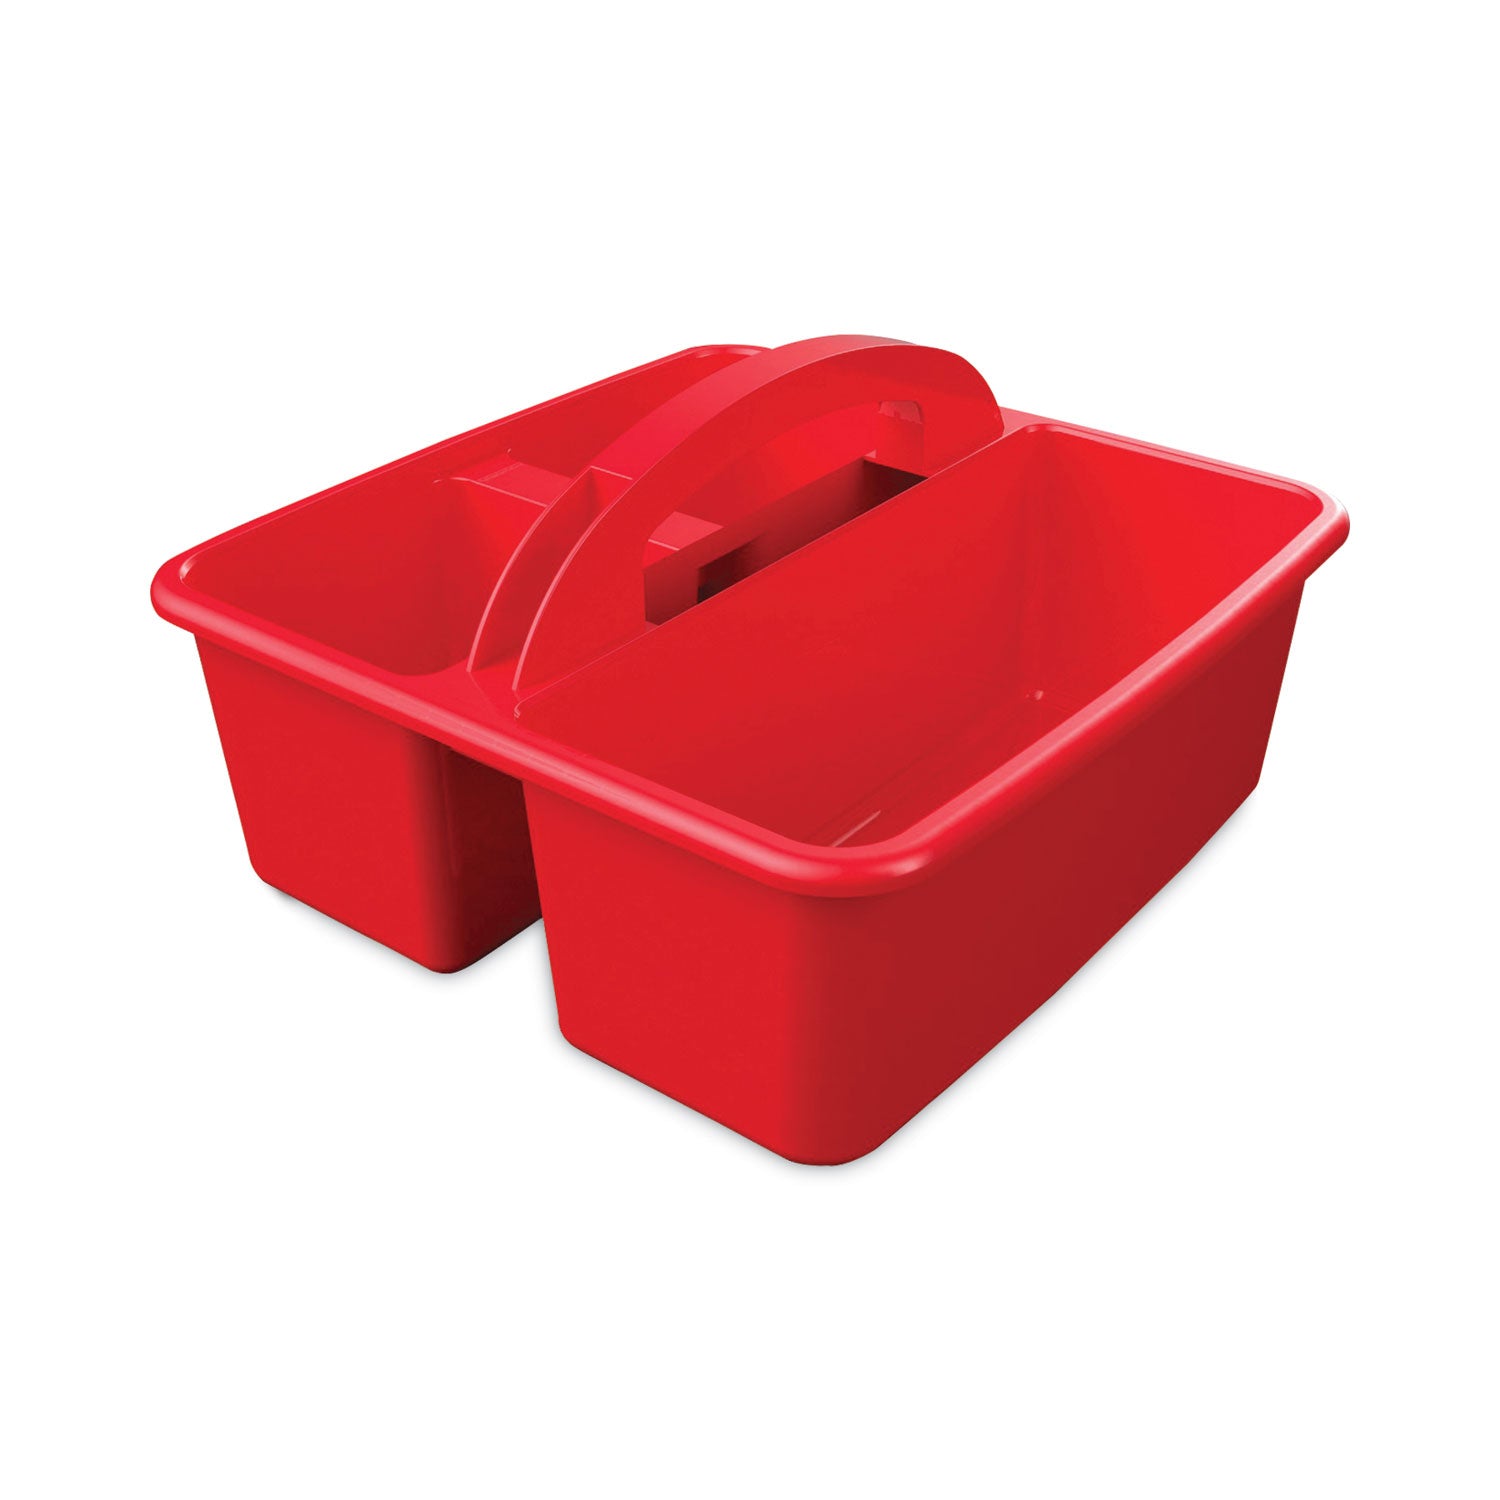 antimicrobial-creativity-storage-caddy-red_def39505red - 2